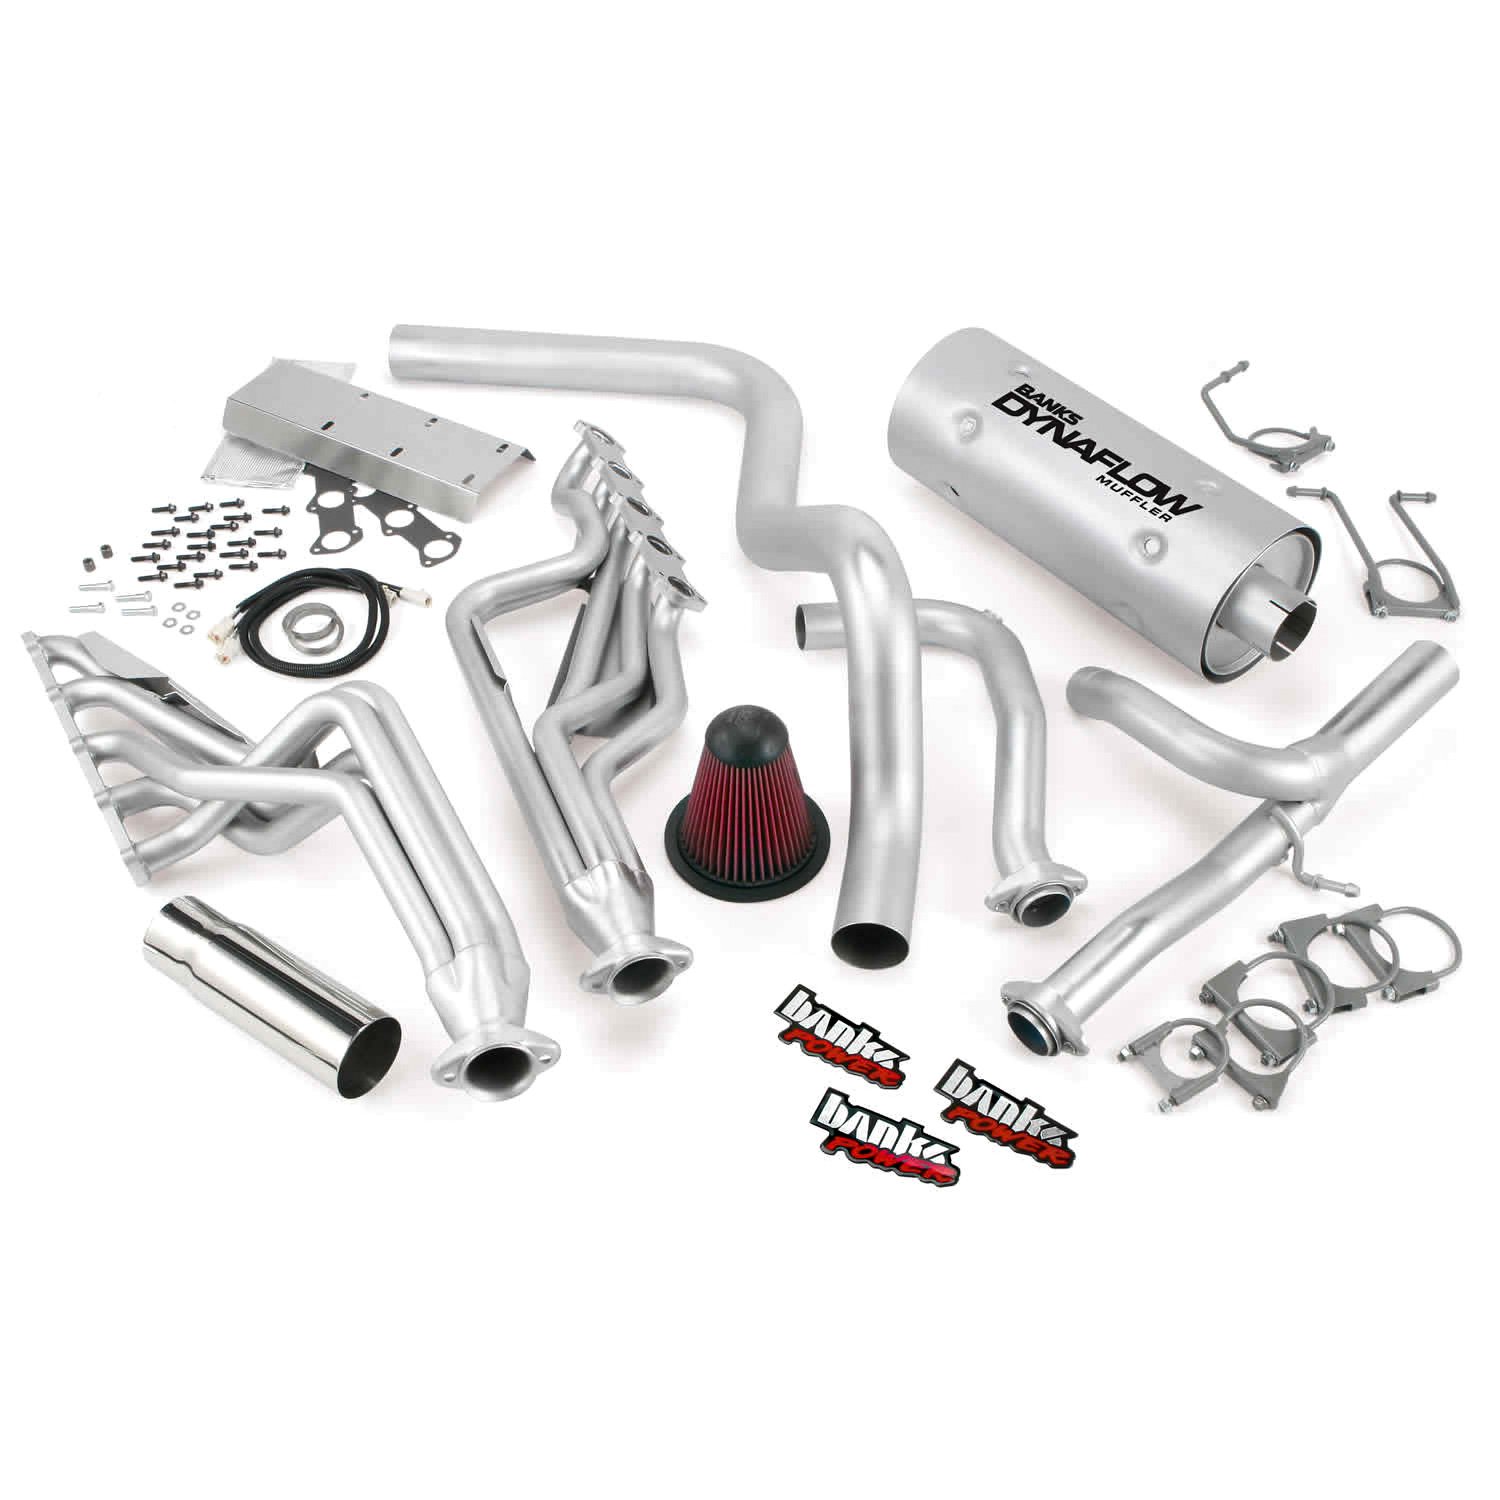 Exhaust PowerPack System 2004-08 6.8L Ford Class C Motorhome